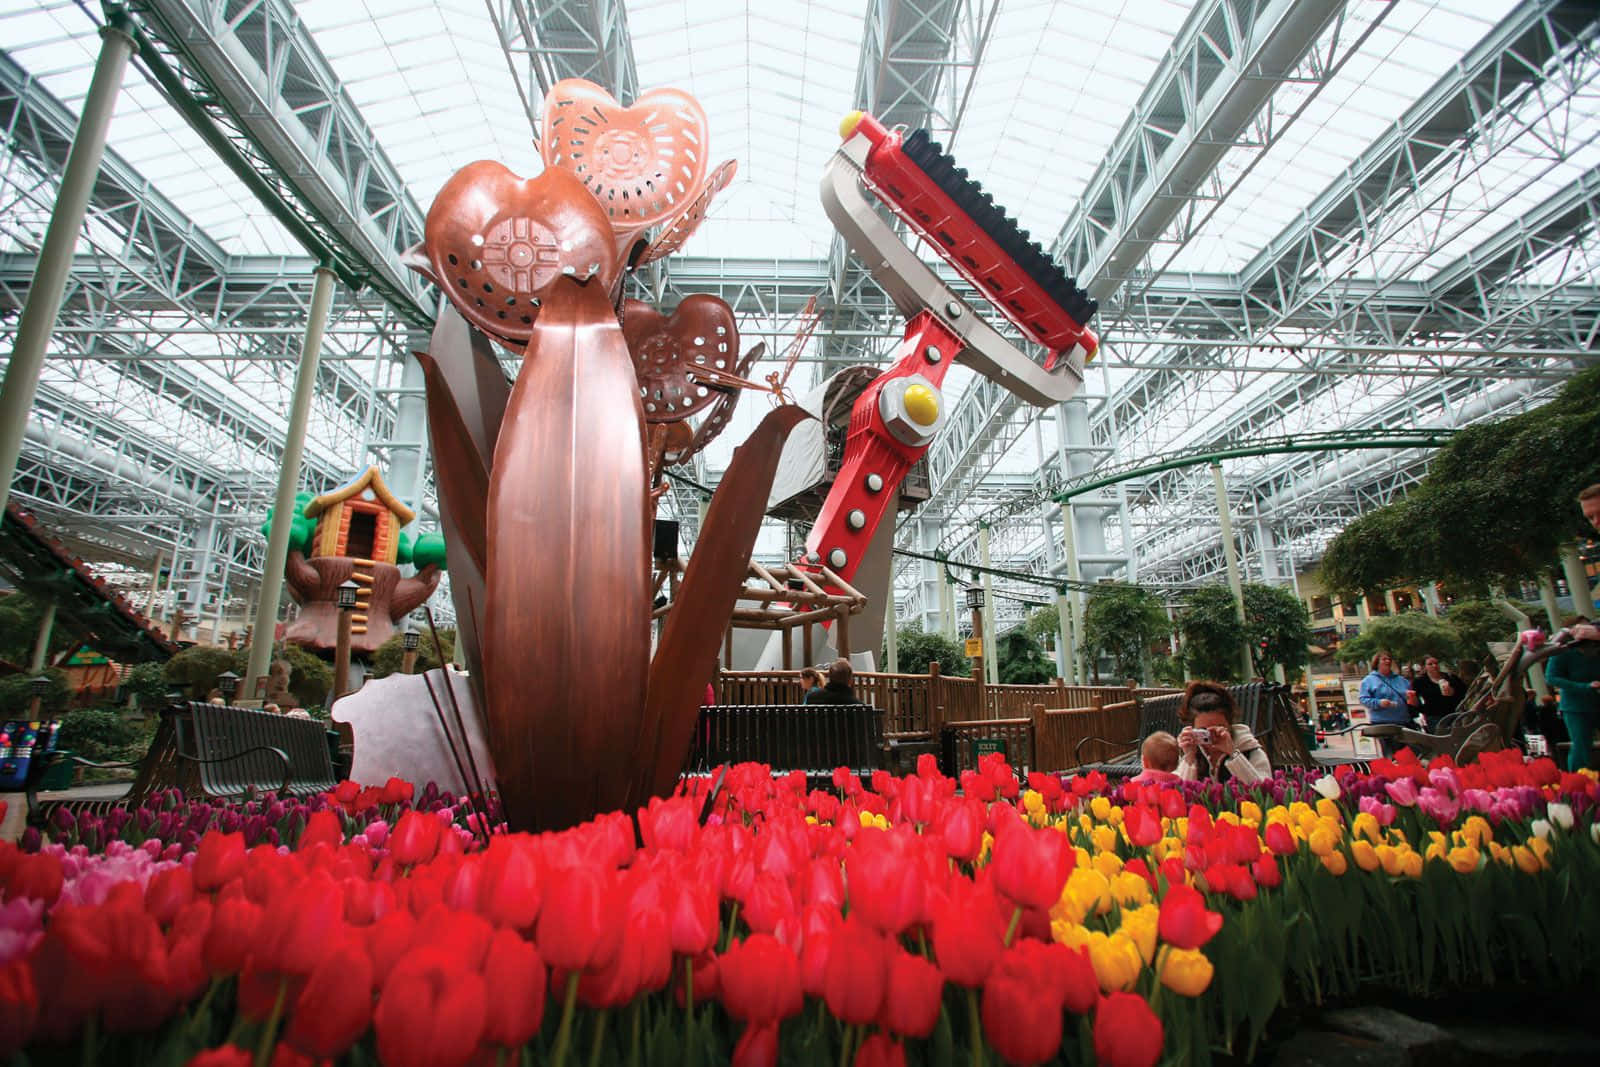 A Large Indoor Garden With Tulips And A Sculpture